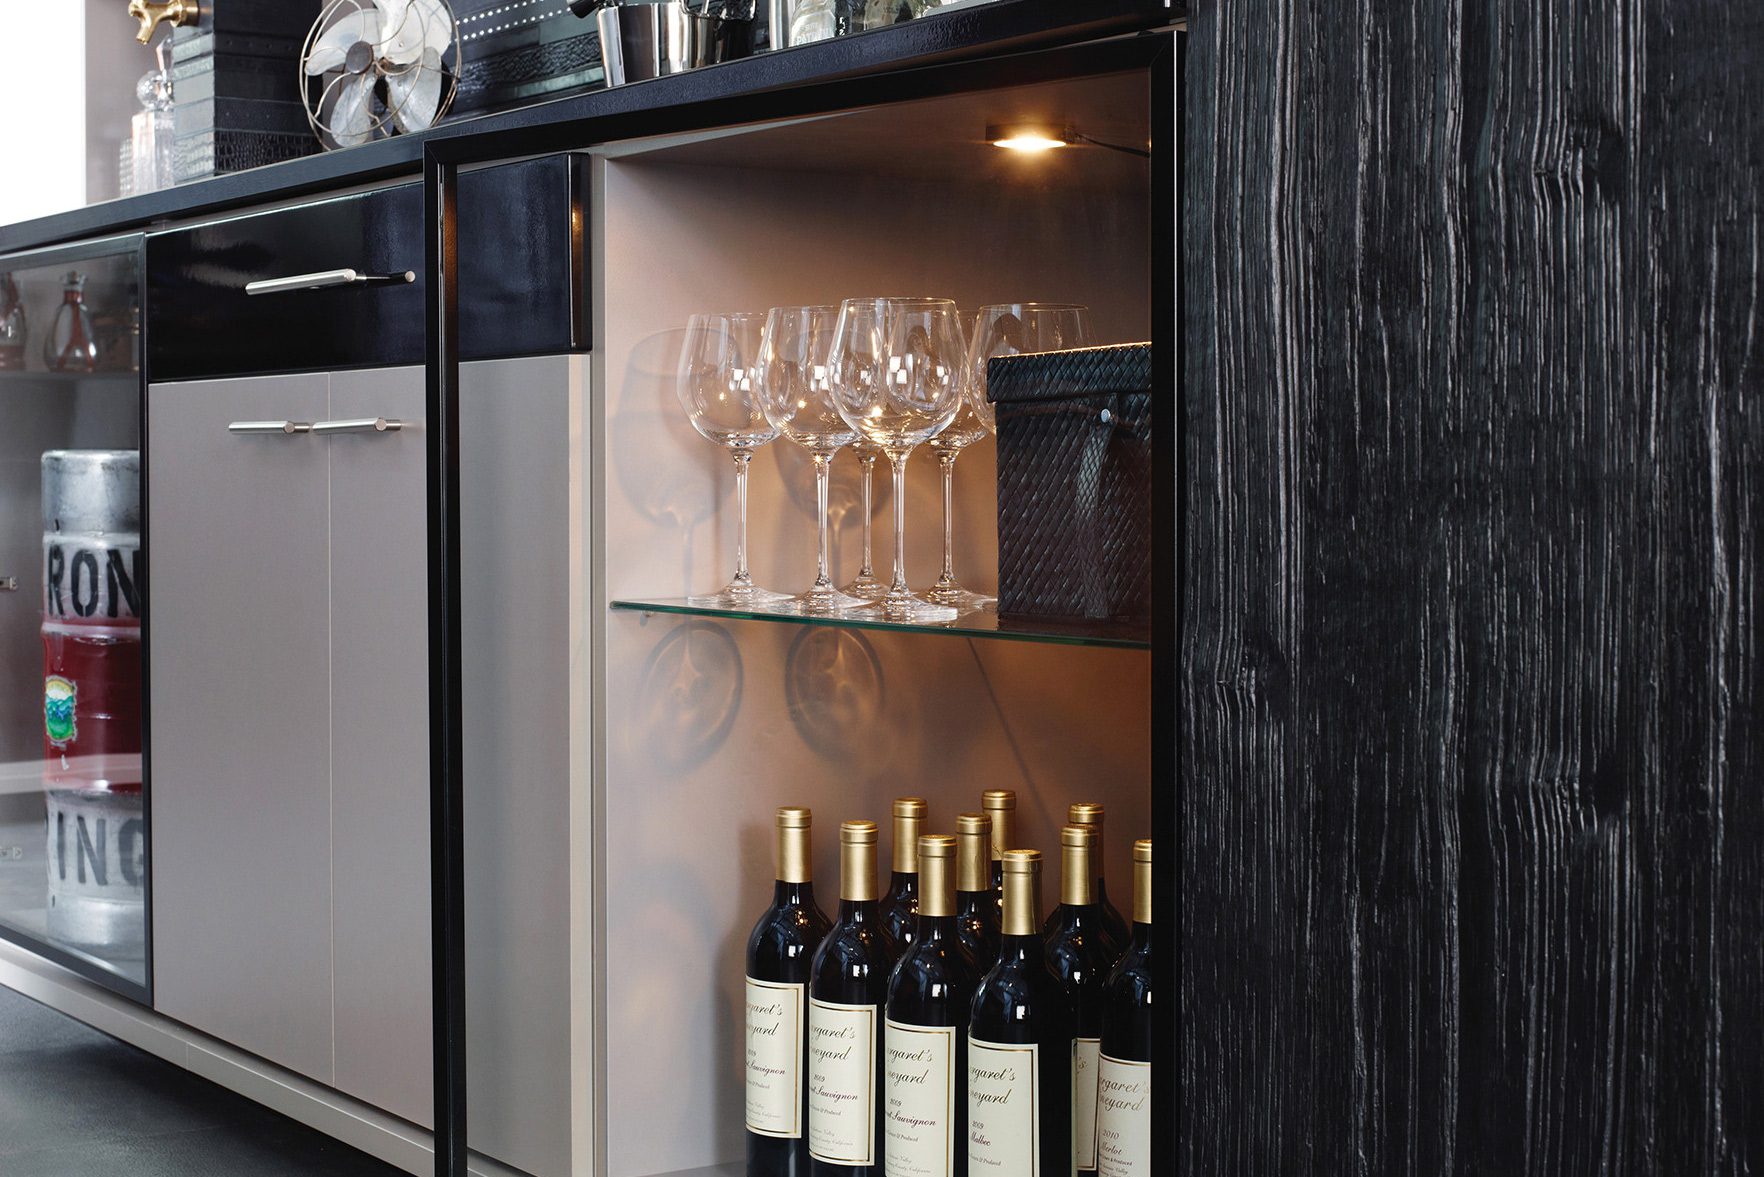 Wine bar in the home with open shelving, LED lighting, prep counter in dark wood grain finish by California Closets